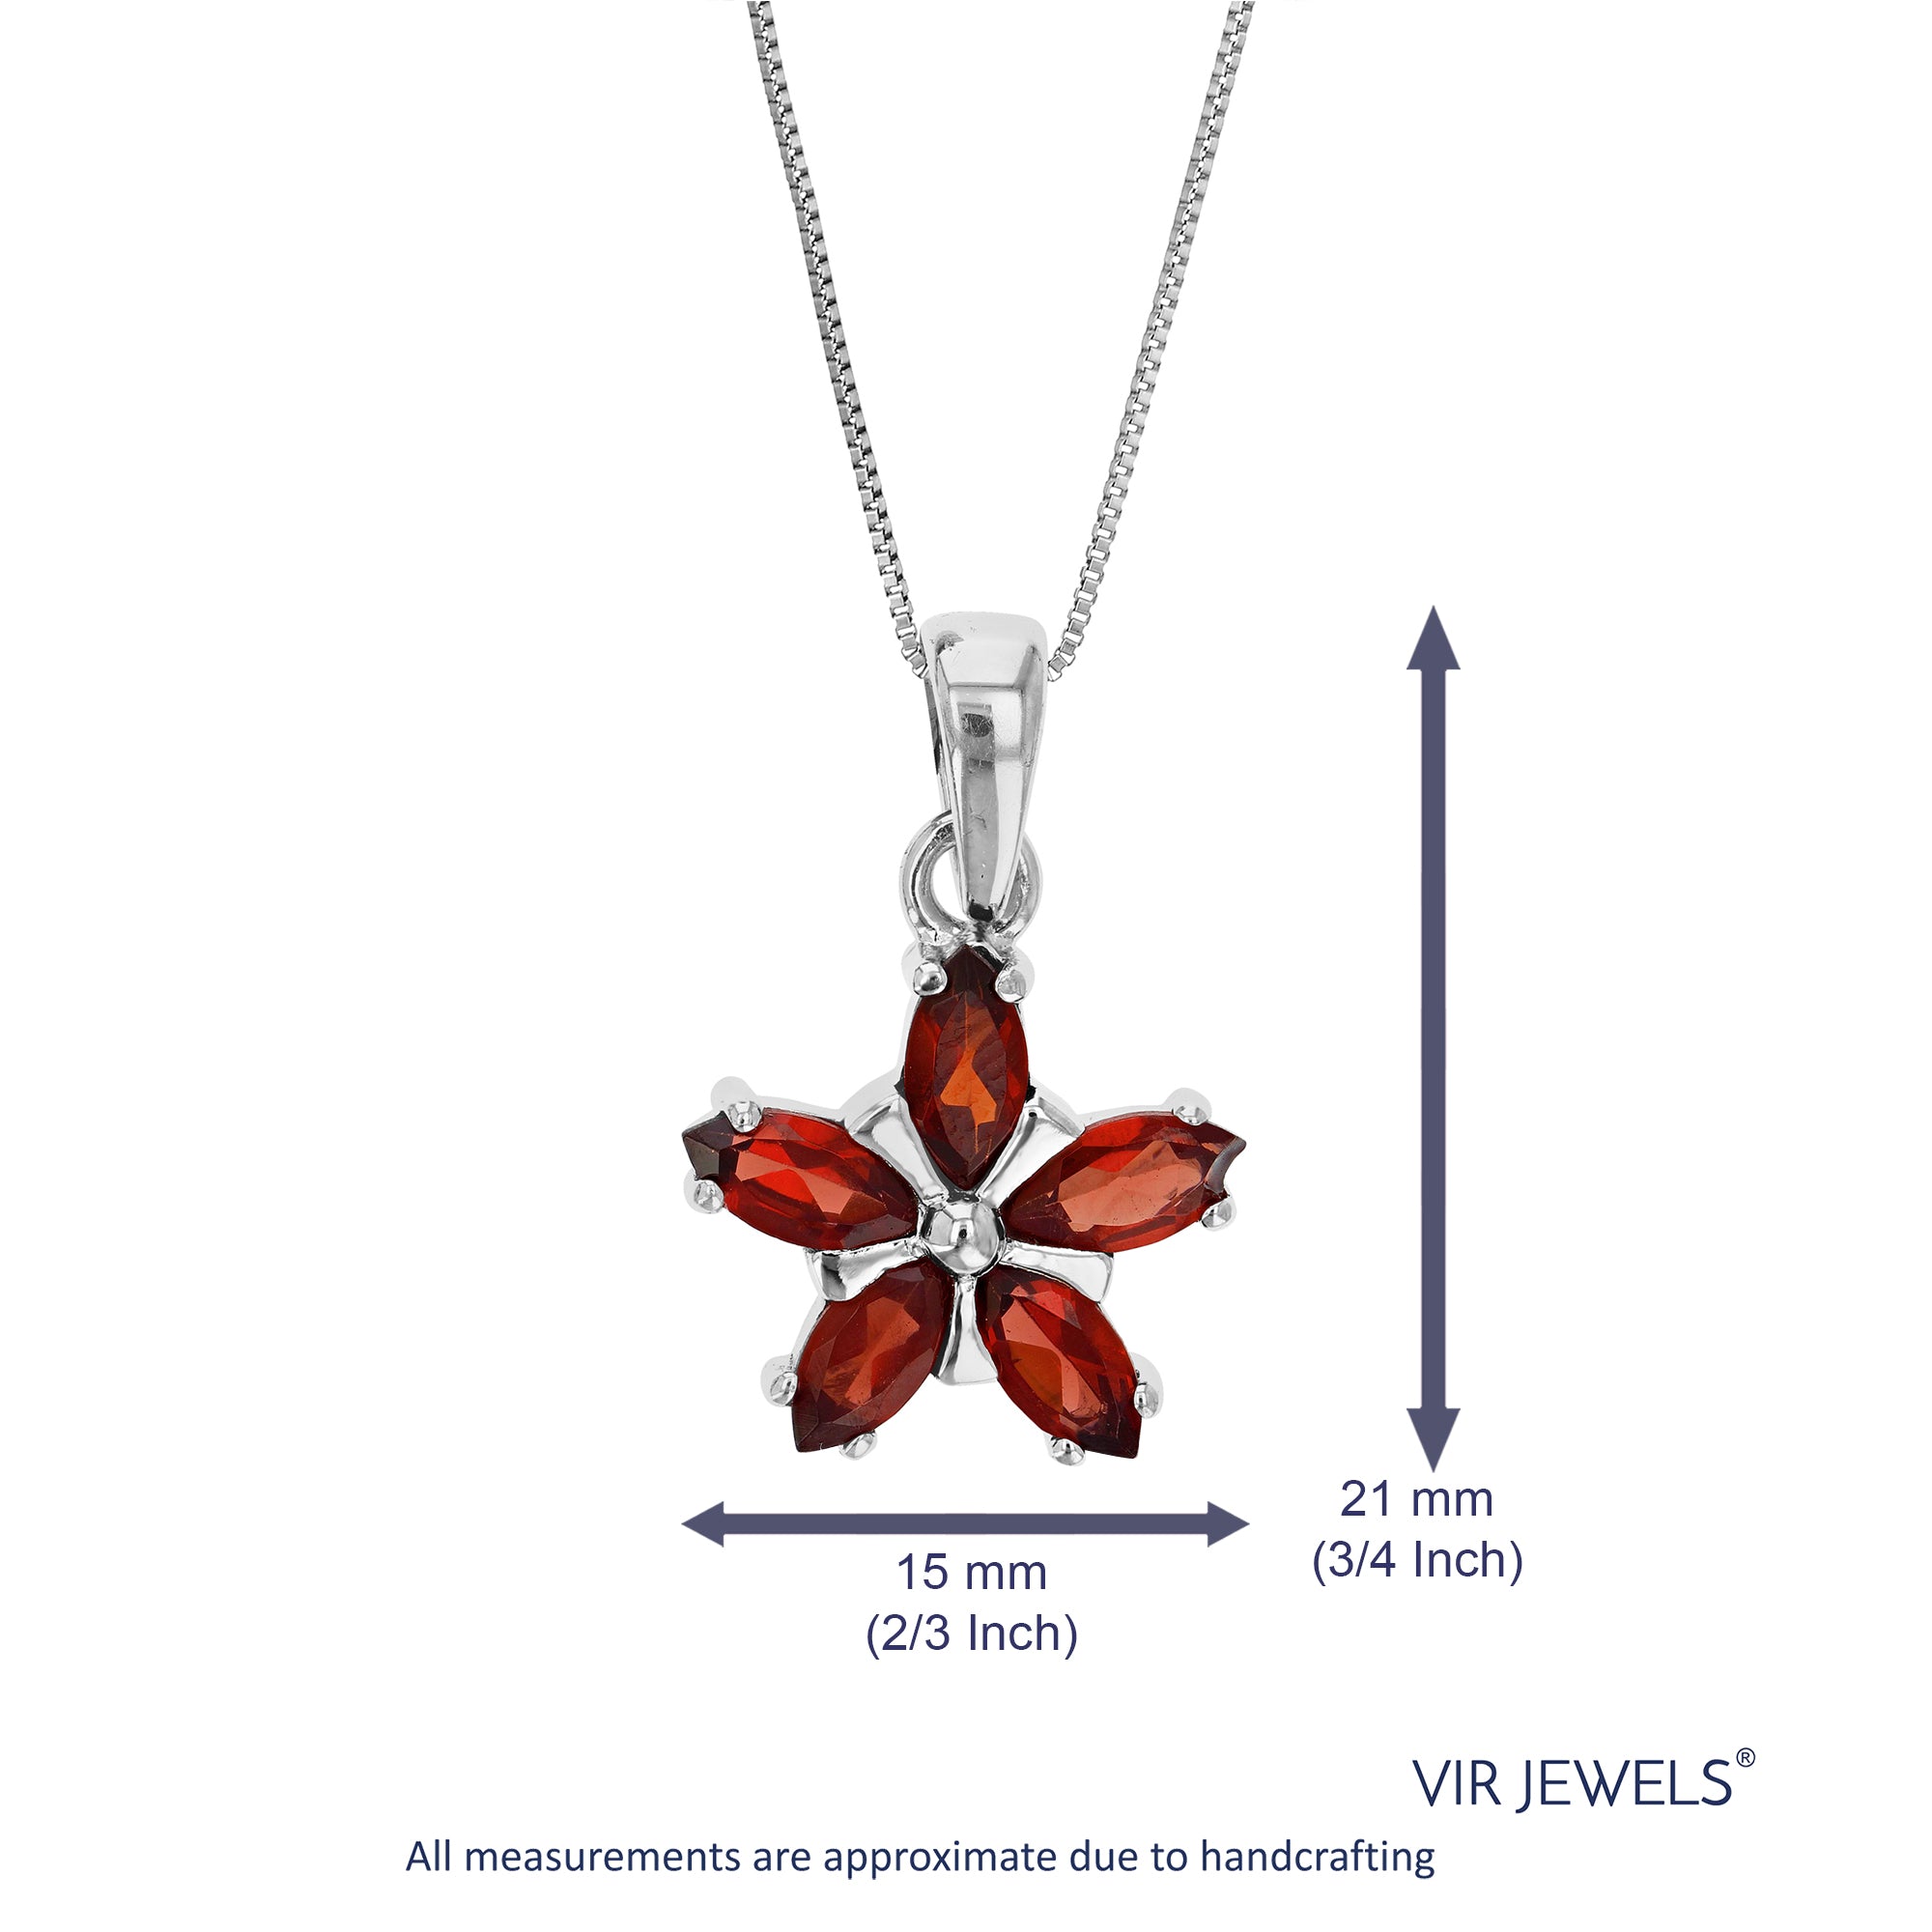 0.60 cttw Pendant Necklace, Garnet Marquise Pendant Necklace for Women in .925 Sterling Silver with Rhodium, 18 Inch Chain, Prong Setting